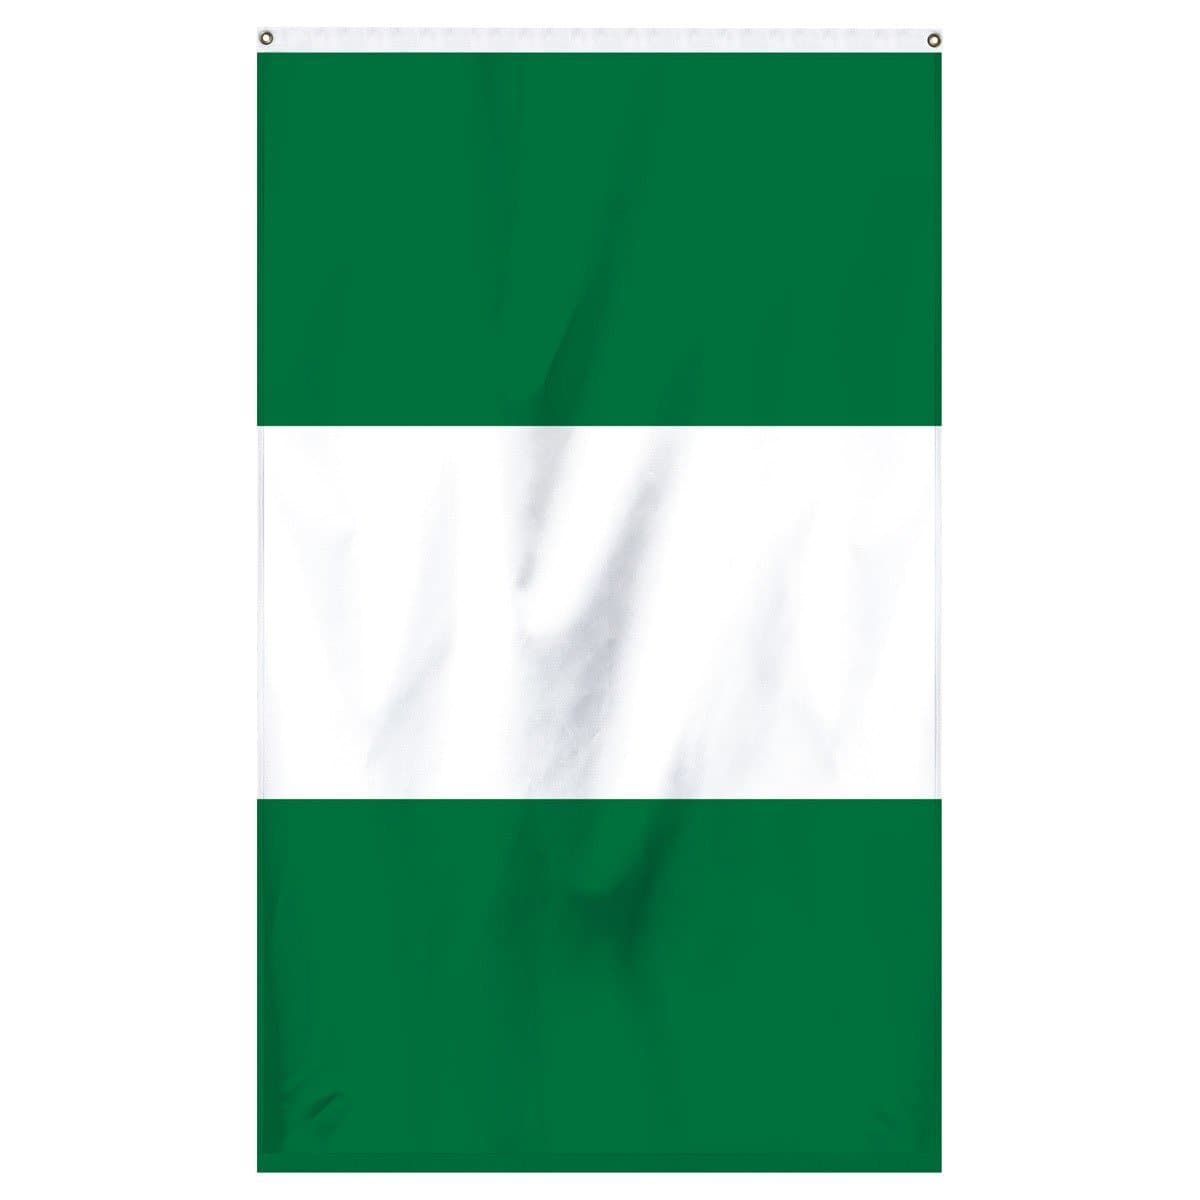 Nigeria national flag made in america for sale to buy online